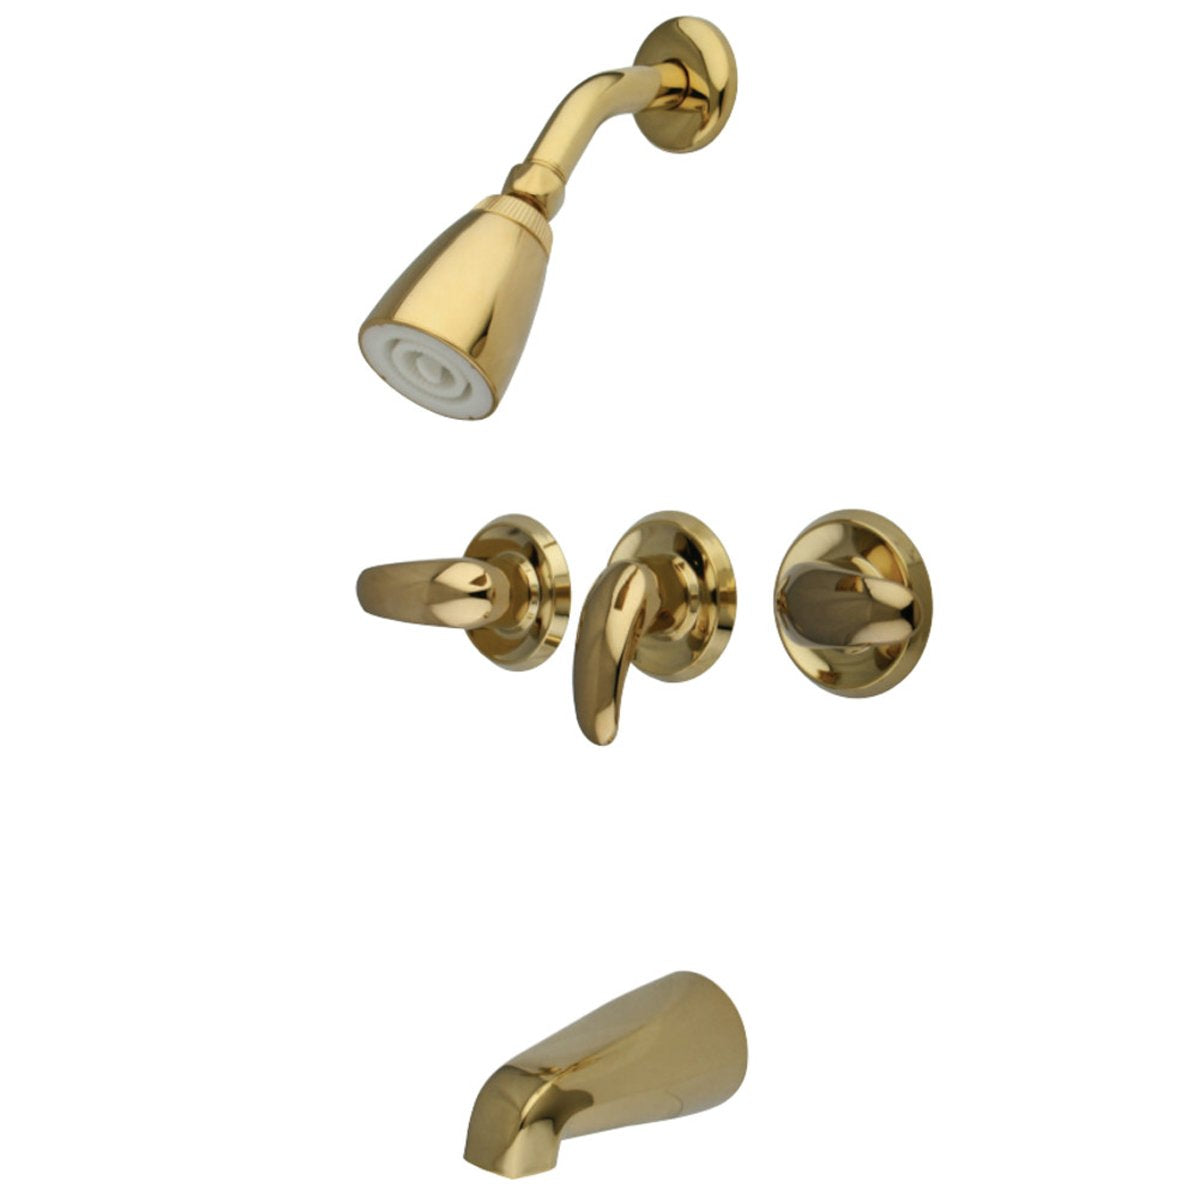 Kingston Brass Legacy Tub and Shower Faucet